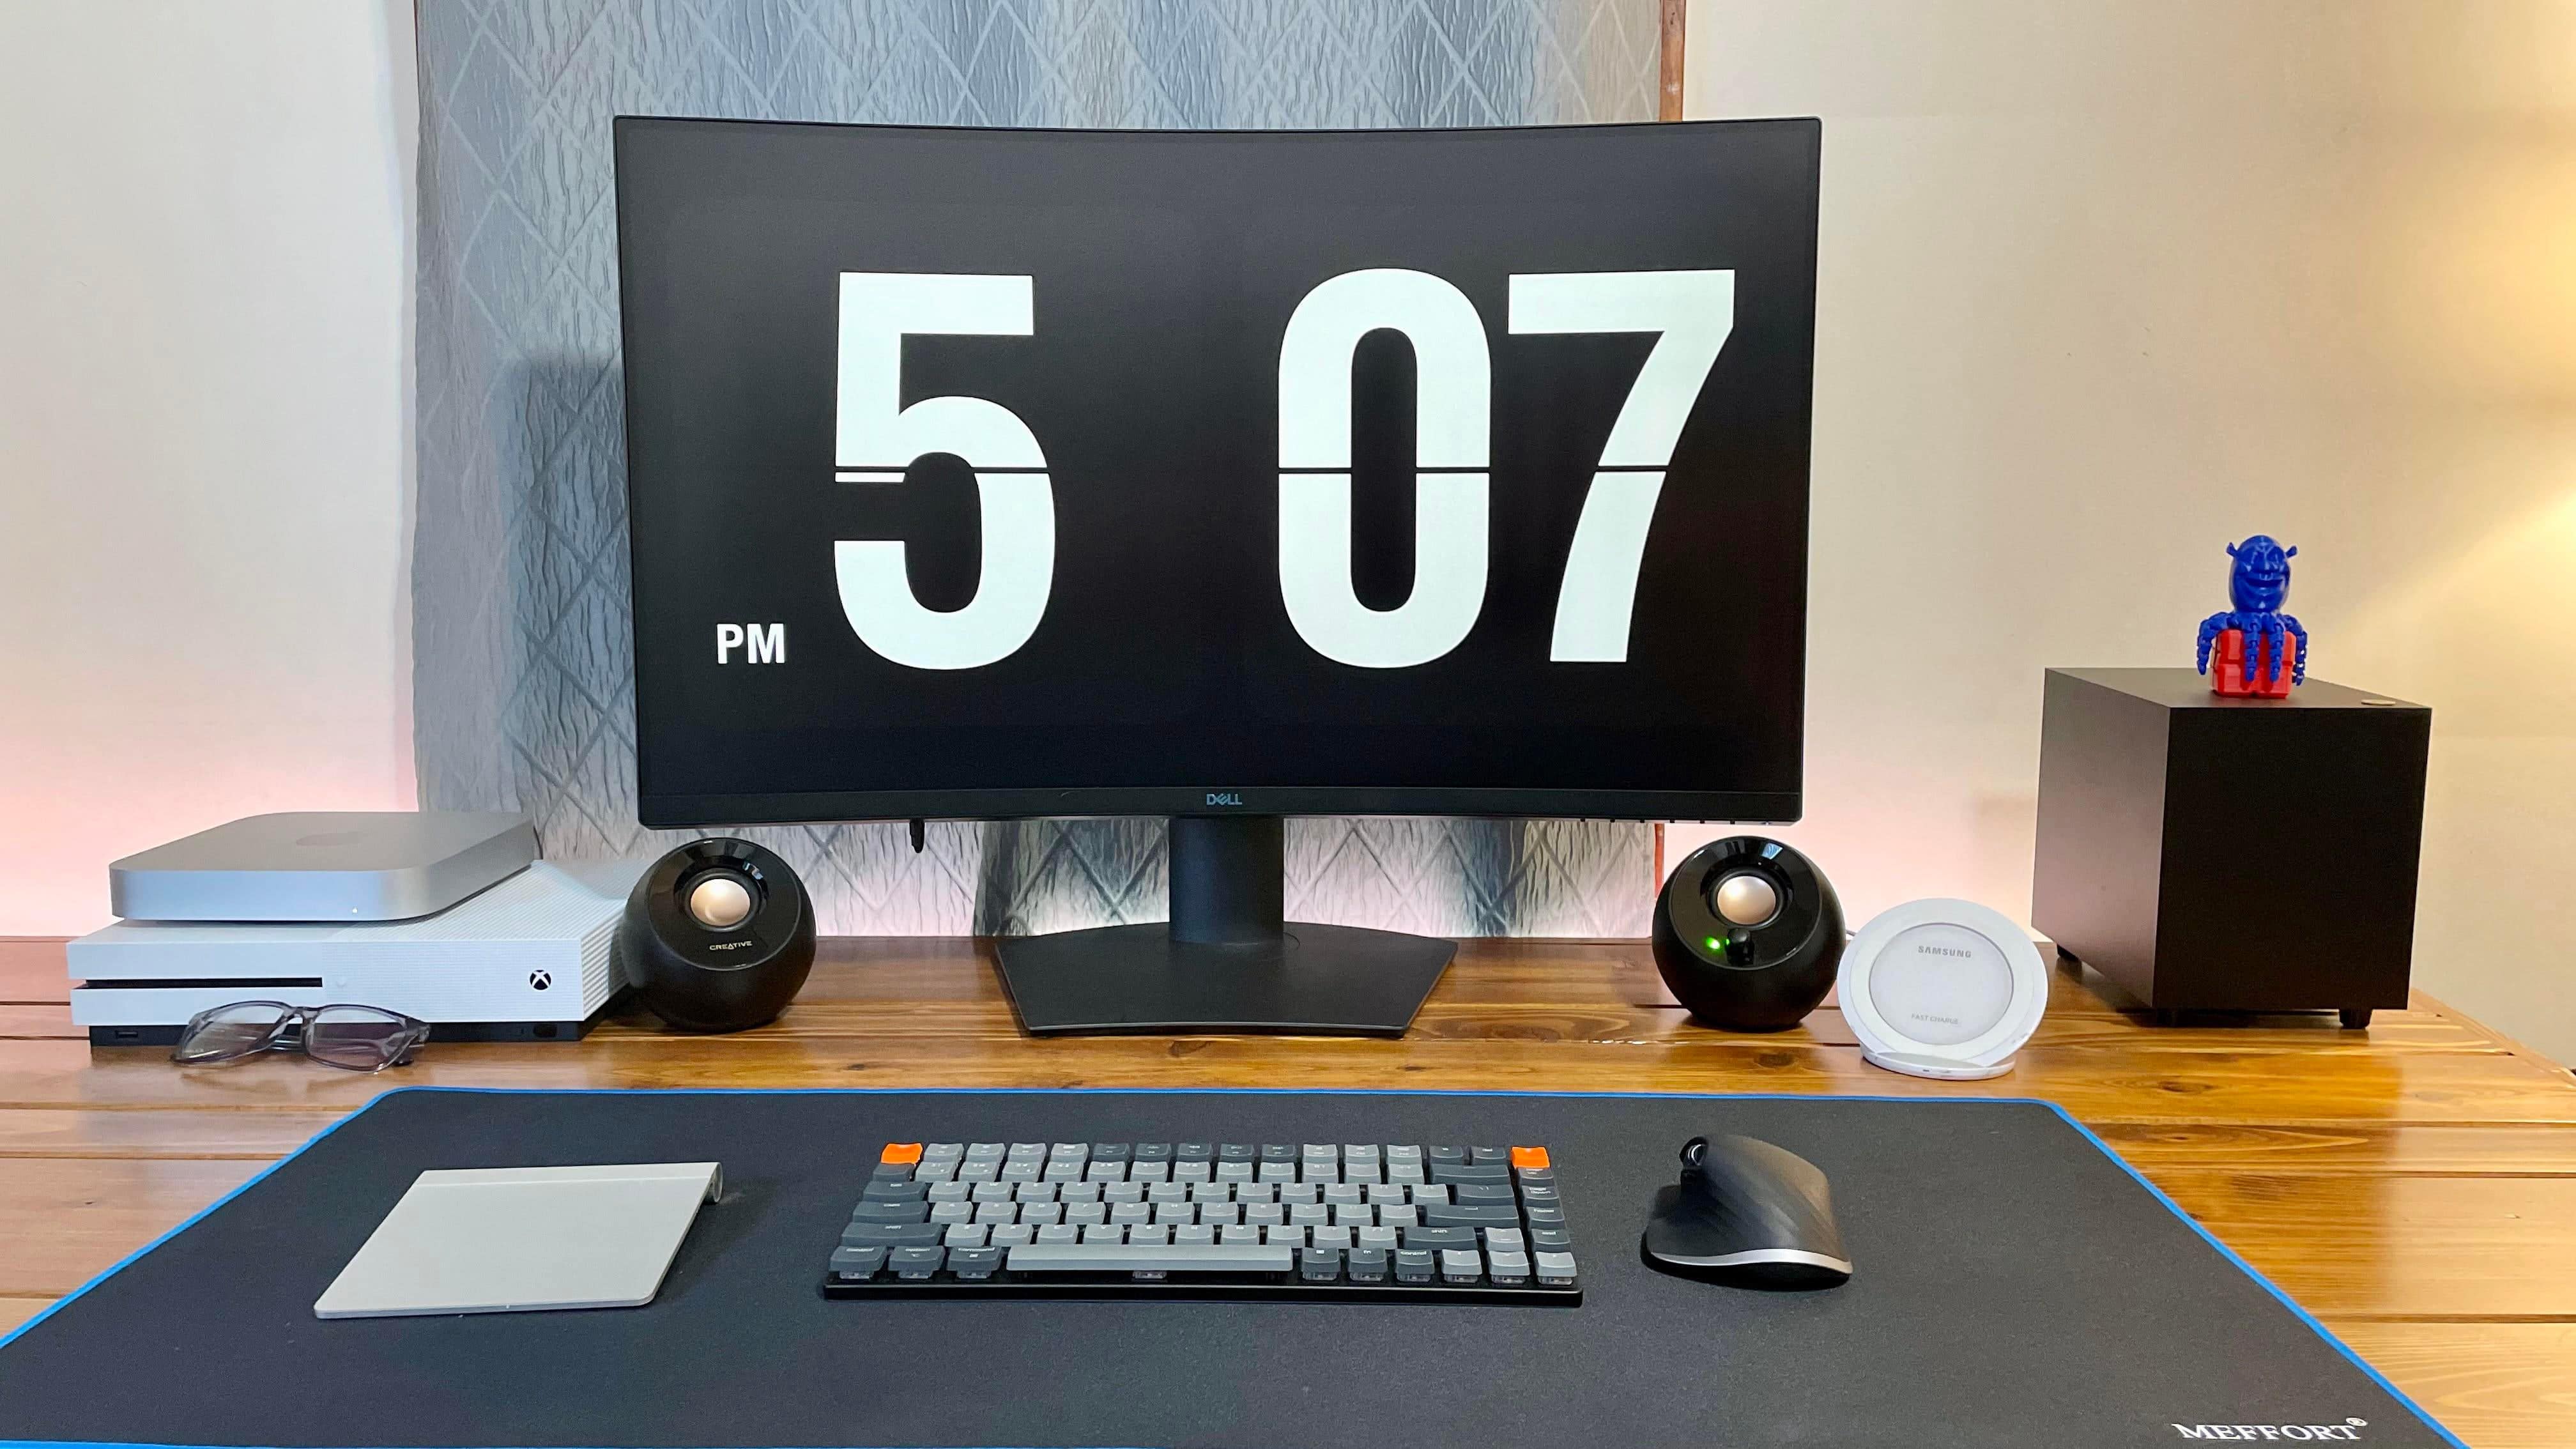 Here's a closer look at the setup proper, including a Keychron mechanical keyboard, a Logitech MX3 mouse and Creative Pebble speakers.